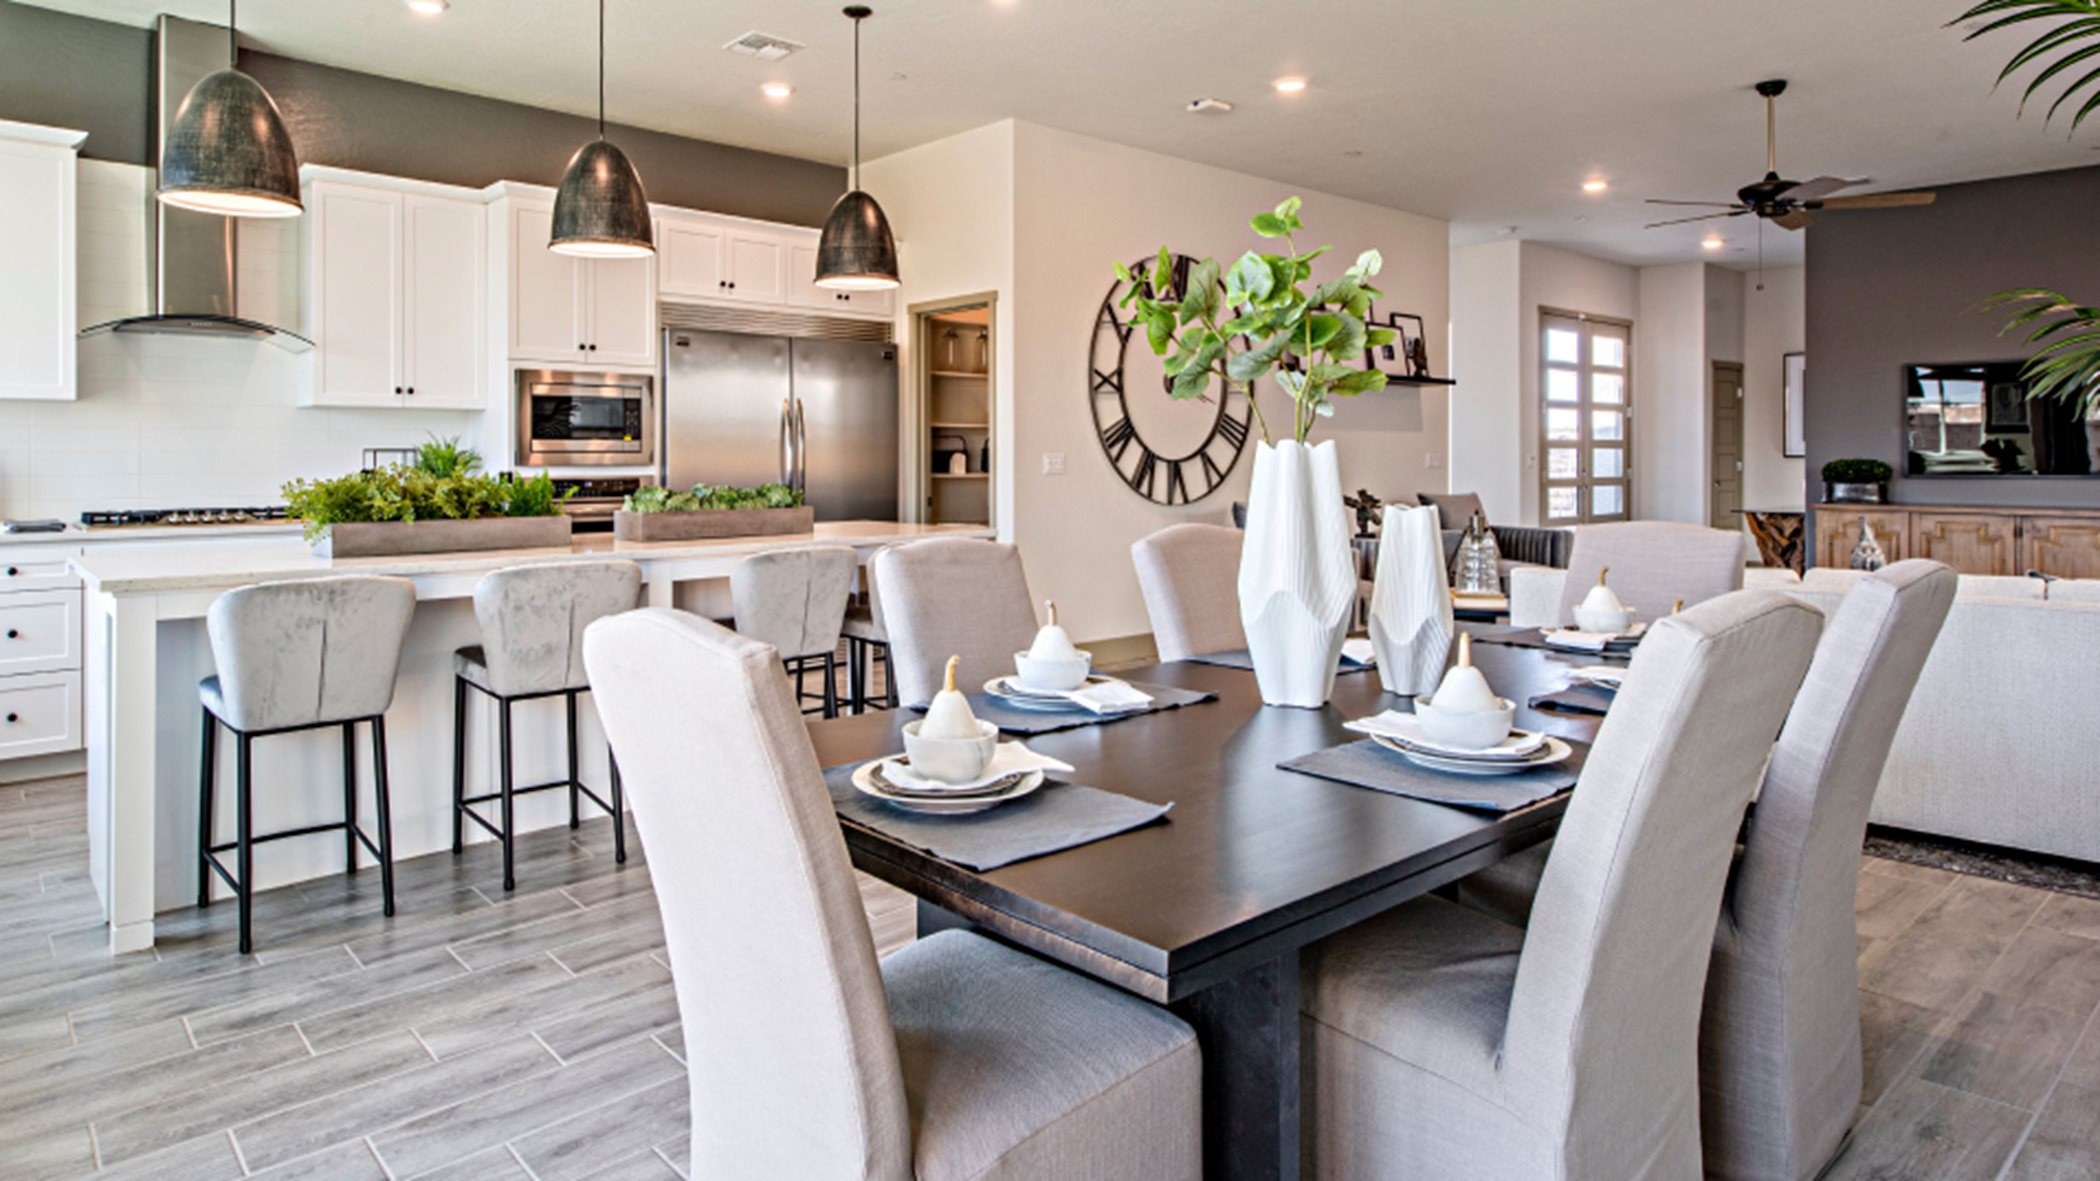 River-Island-Ranch Skye Series Solstice Kitchen & Dining